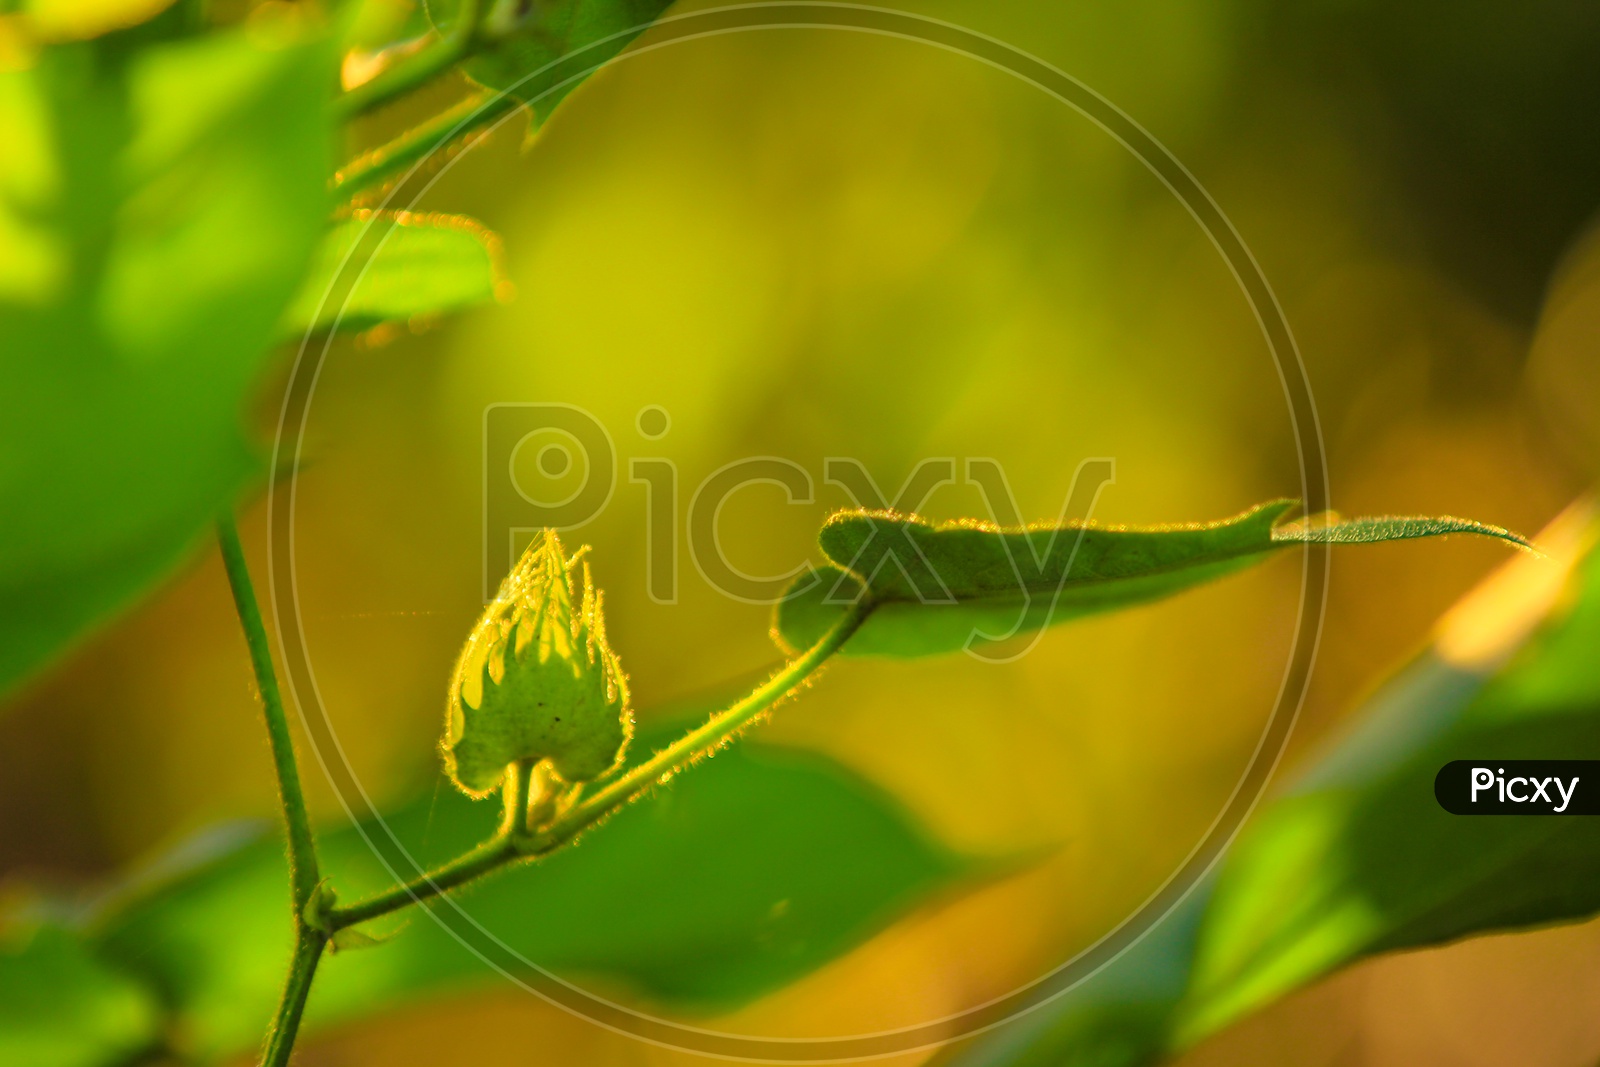 Green Cotton Crop Fields in India with Golden Sunlight on Plants  Closeup Shot